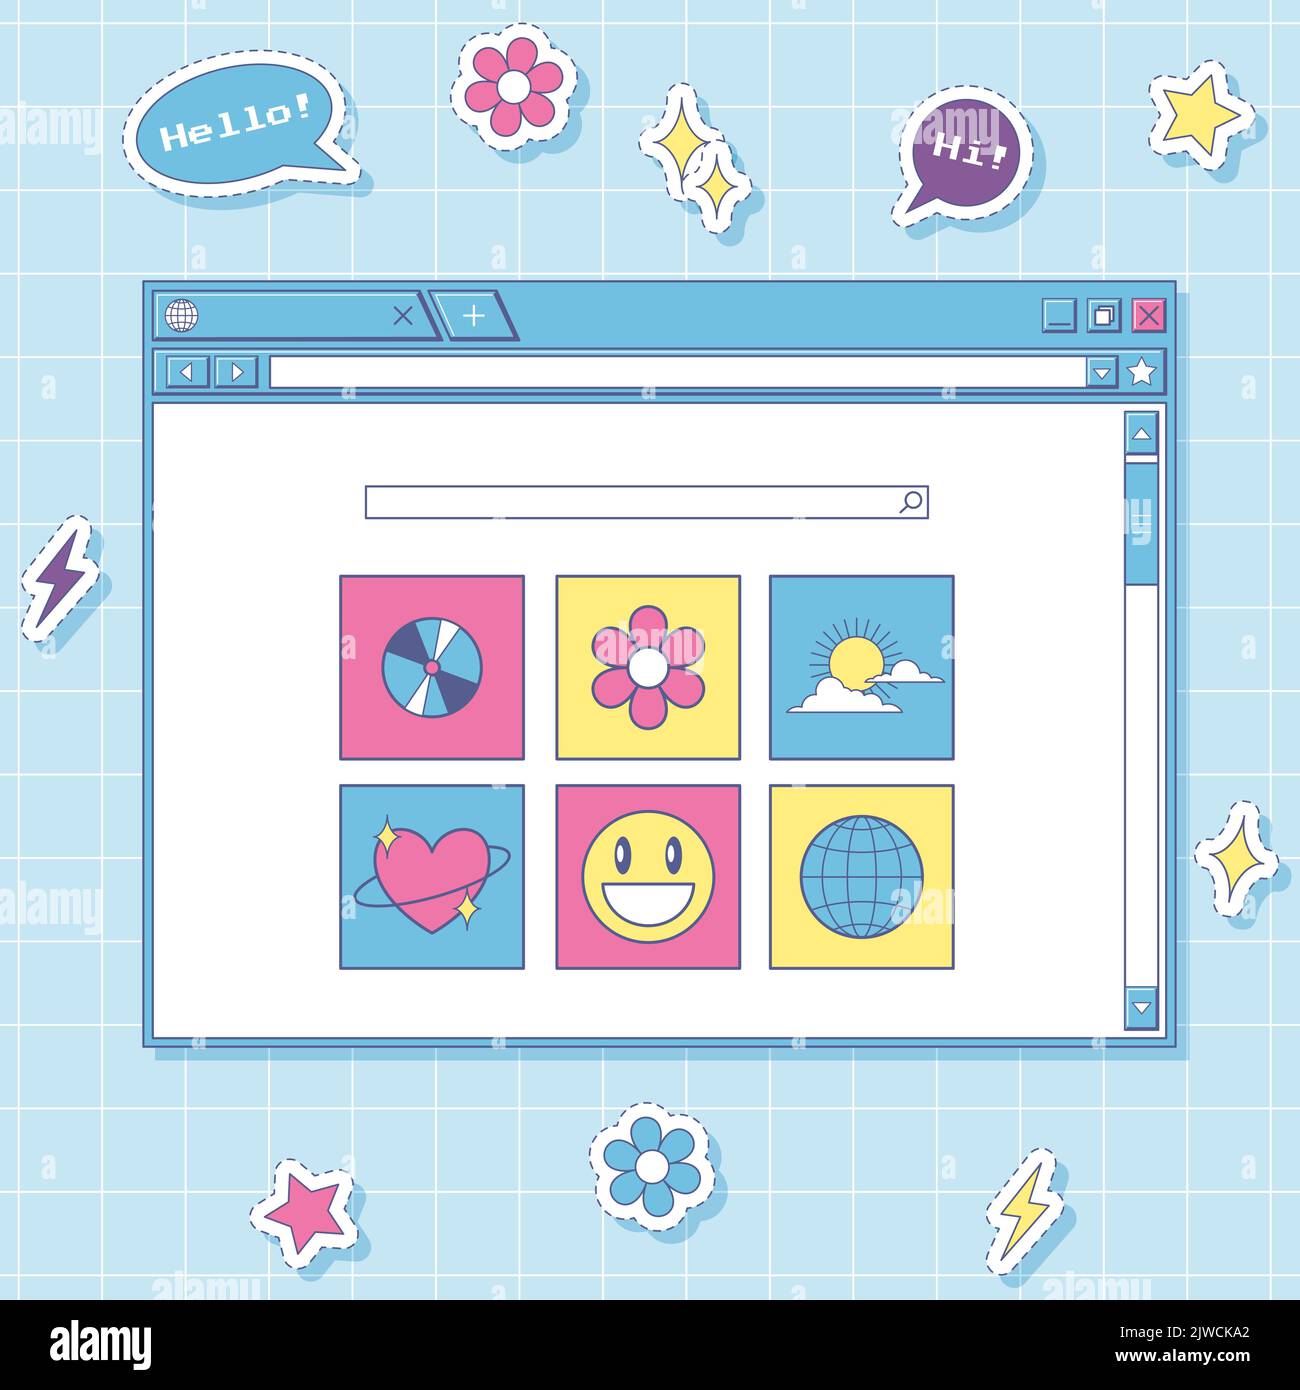 A browser window with a search bar. Retro style user interface. Aesthetics of an old computer. Template for social networks Y2k stickers with flowers, Stock Vector